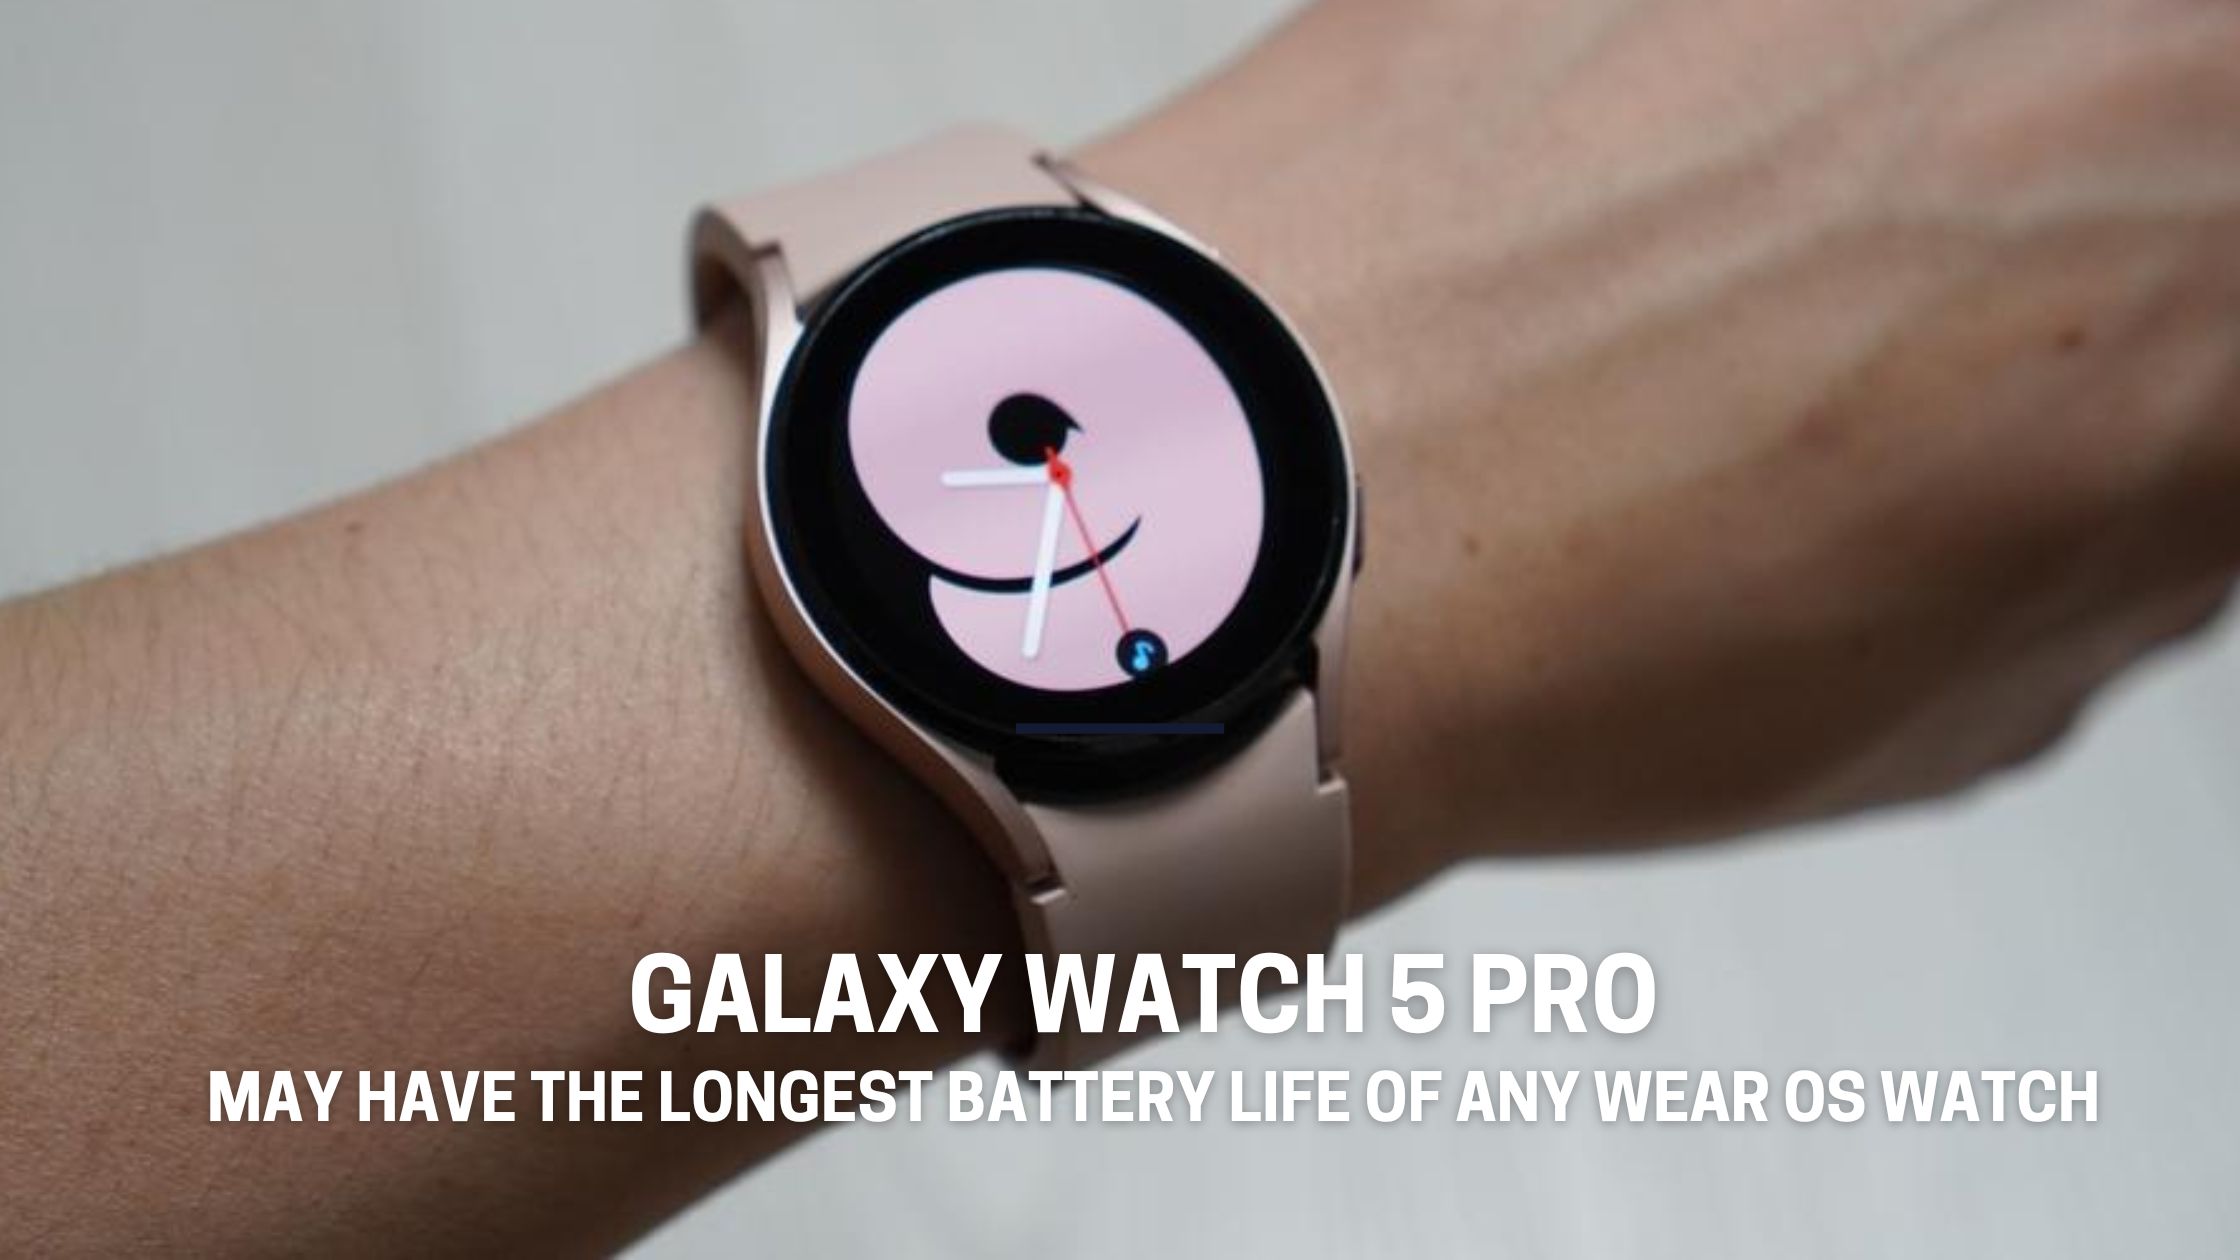 Galaxy Watch 5 Pro may have the longest battery life of any Wear OS watch